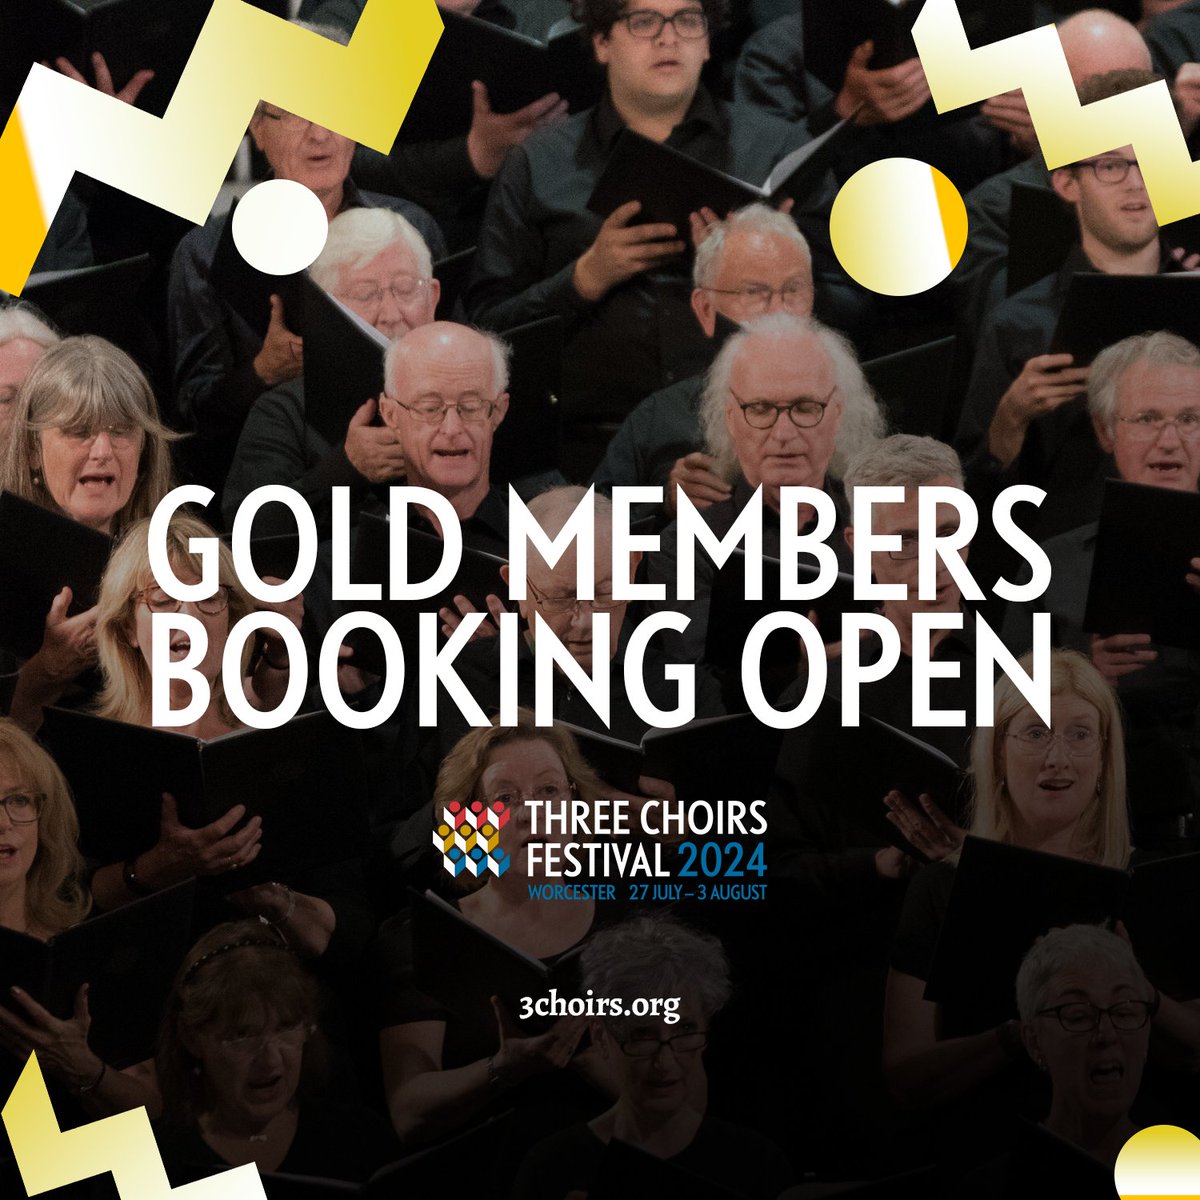 GOLD MEMBERS | Booking begins from 10am today! Simply log-in to 3choirs.org and book now! 📷 3choirs.org/whats-on Please note: We're currently running with reduced staffing on the telephone lines due to illness. We apologise for any inconvenience.